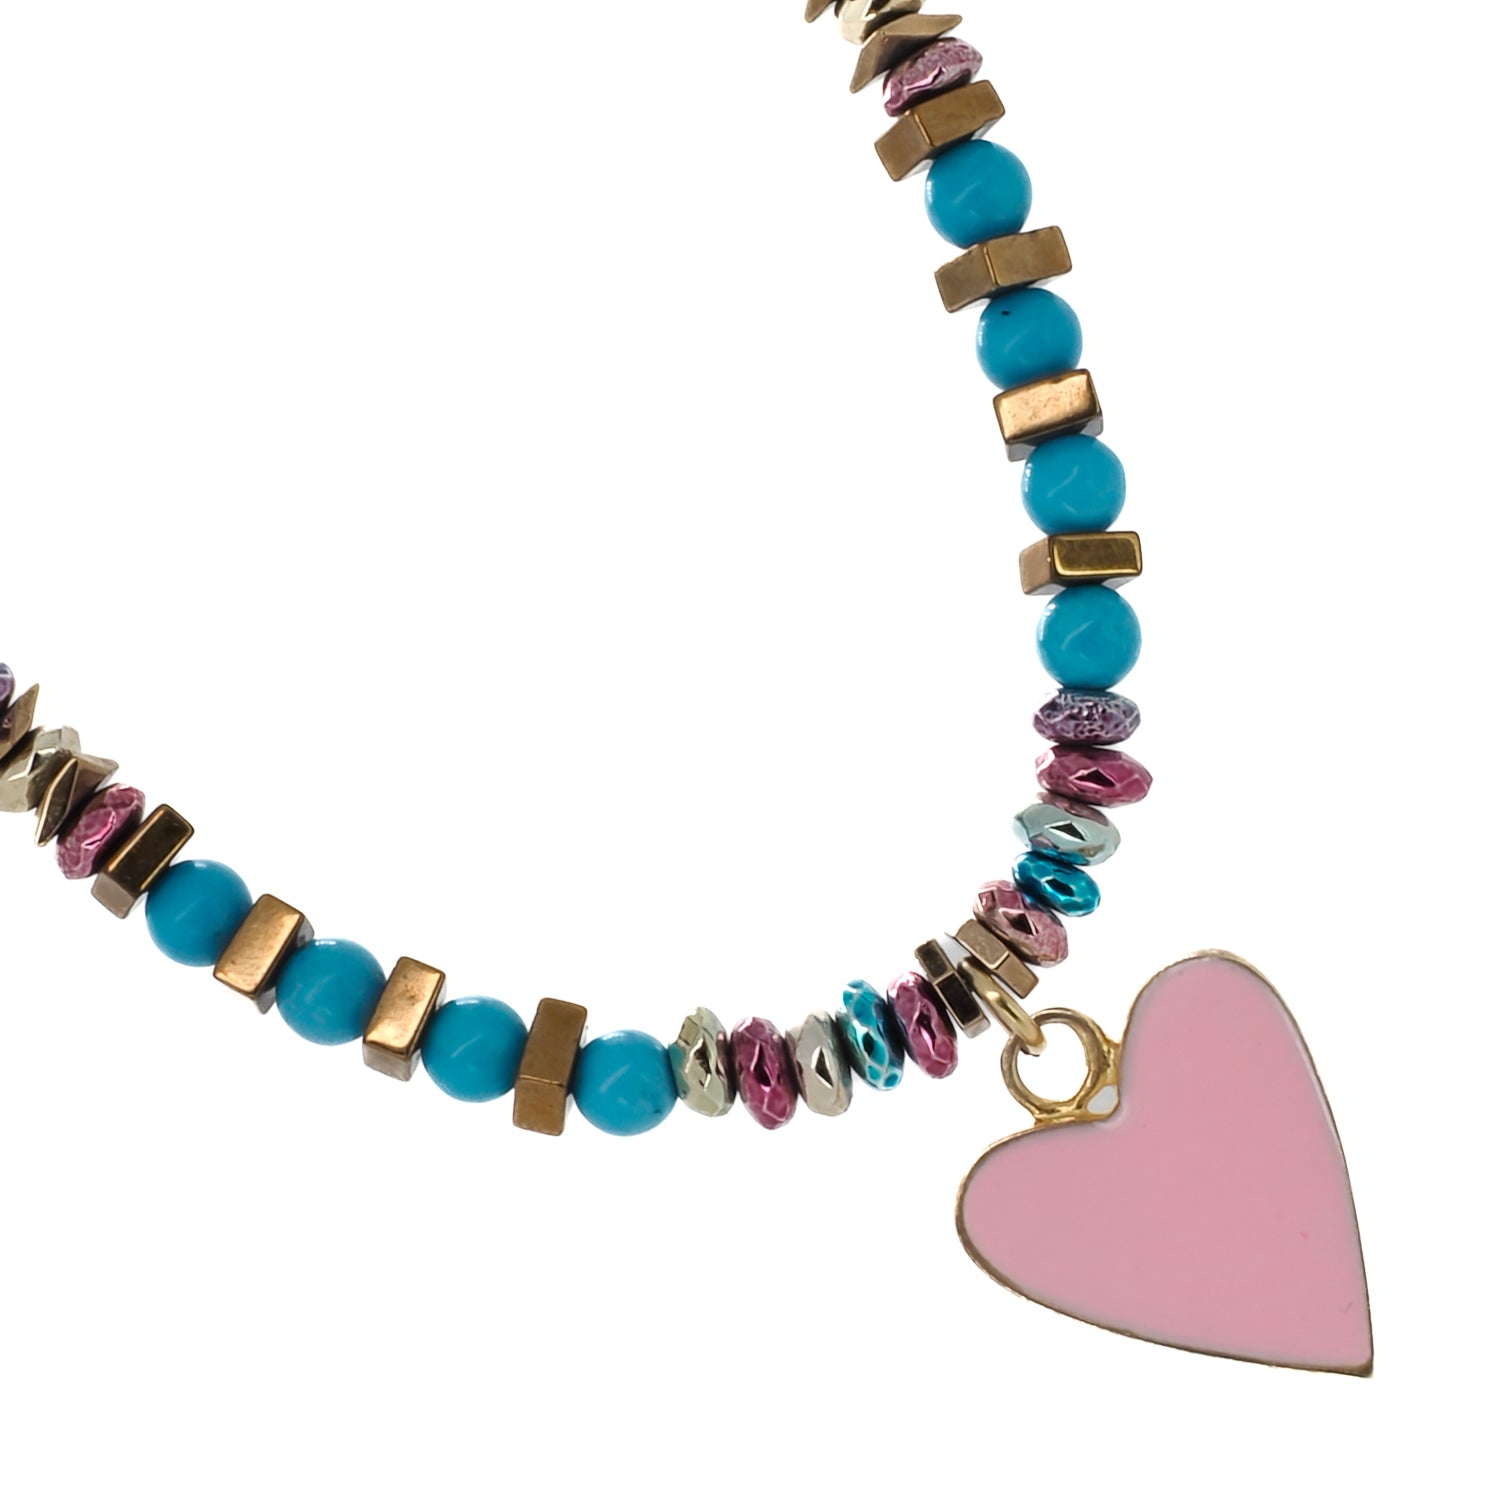 Purification and Inner Calm Necklace - Turquoise stones bring balance and serenity to your life.